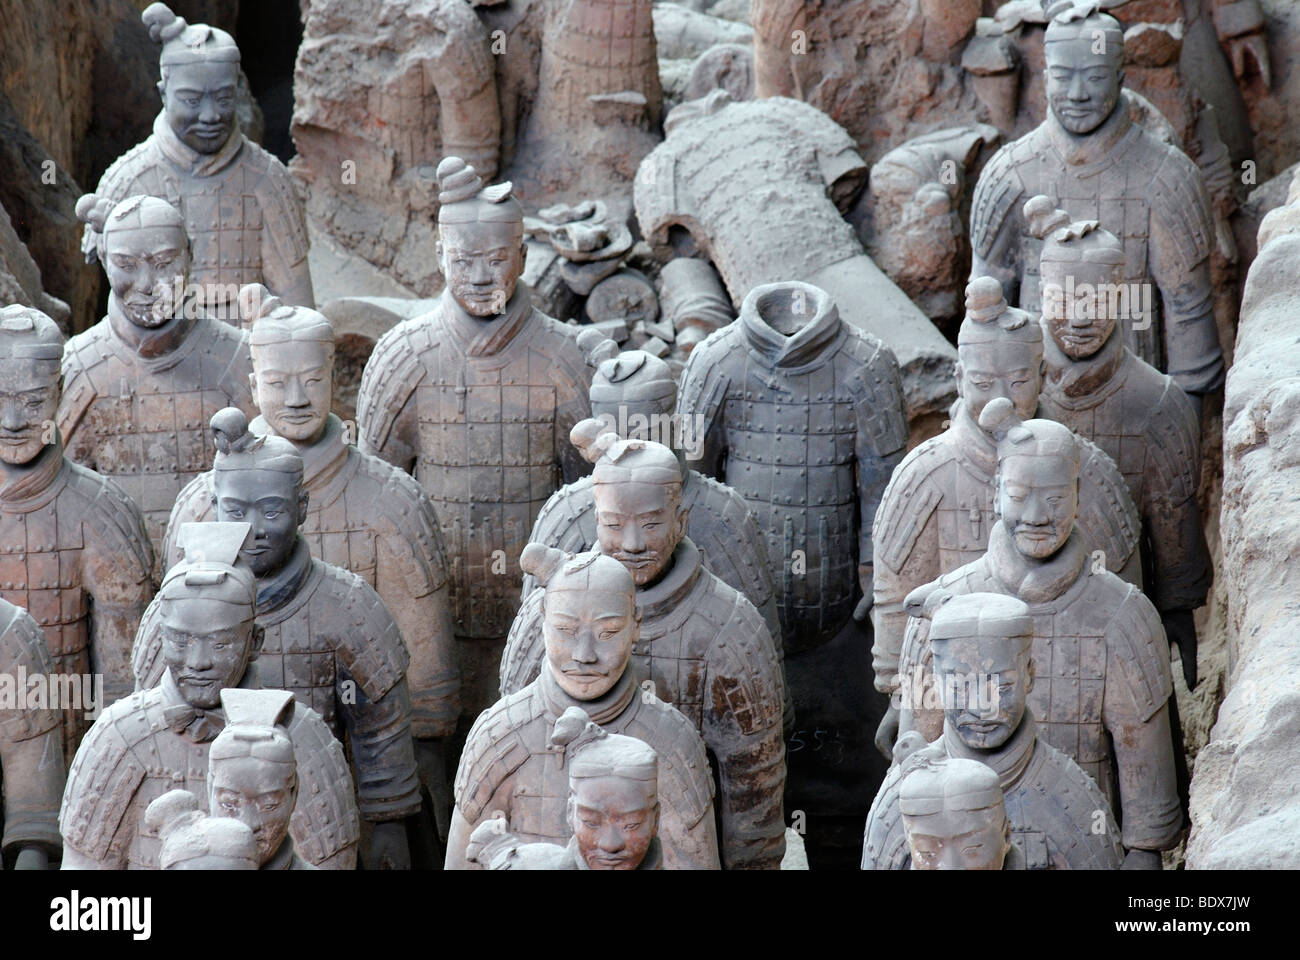 Terracotta army, part of the burial site, hall 1, mausoleum of the 1st Emperor Qin Shihuangdi in Xi'an, Shaanxi Province, China Stock Photo